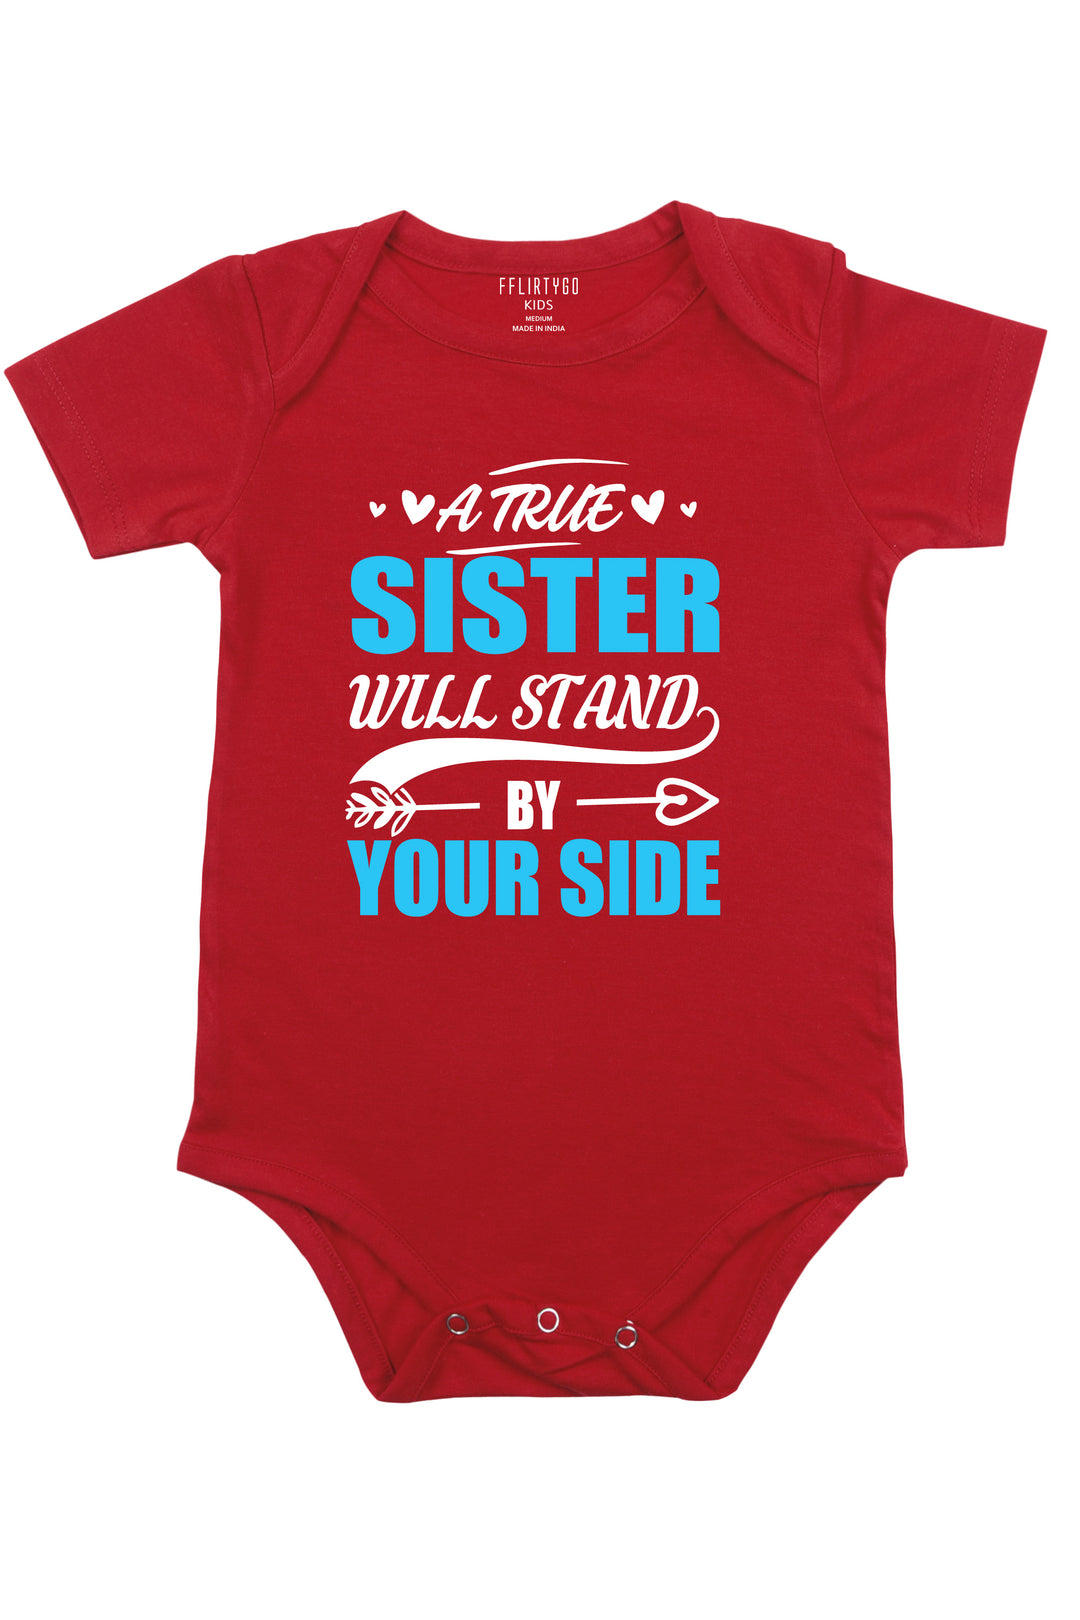 A True Sister Will Stand By Your Side Baby Romper | Onesies